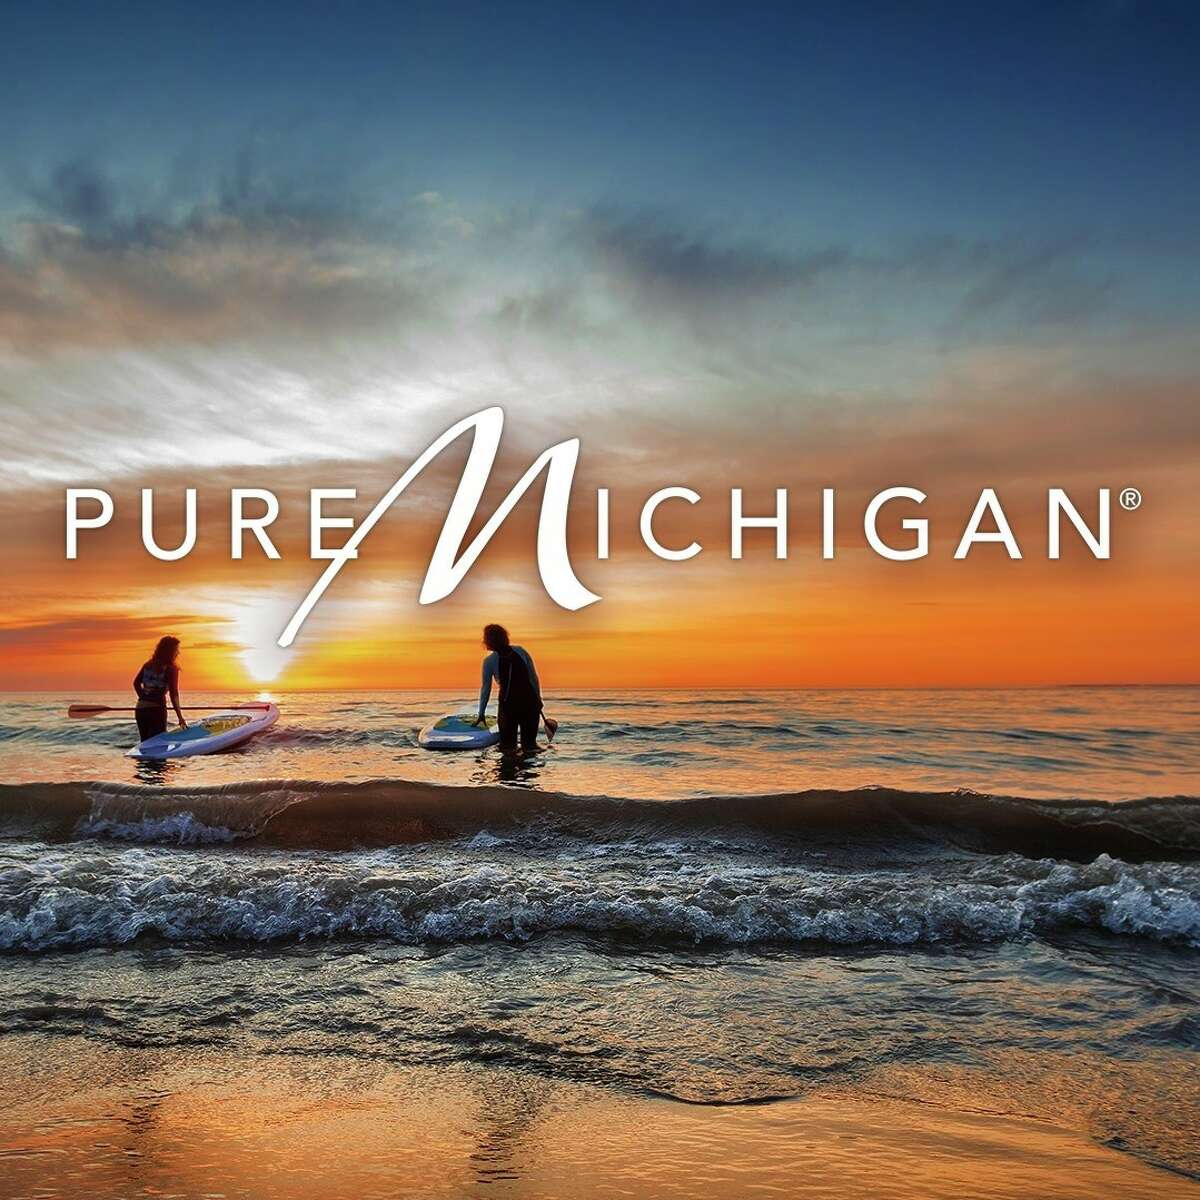 Pure Michigan updating brand to reach younger audiences